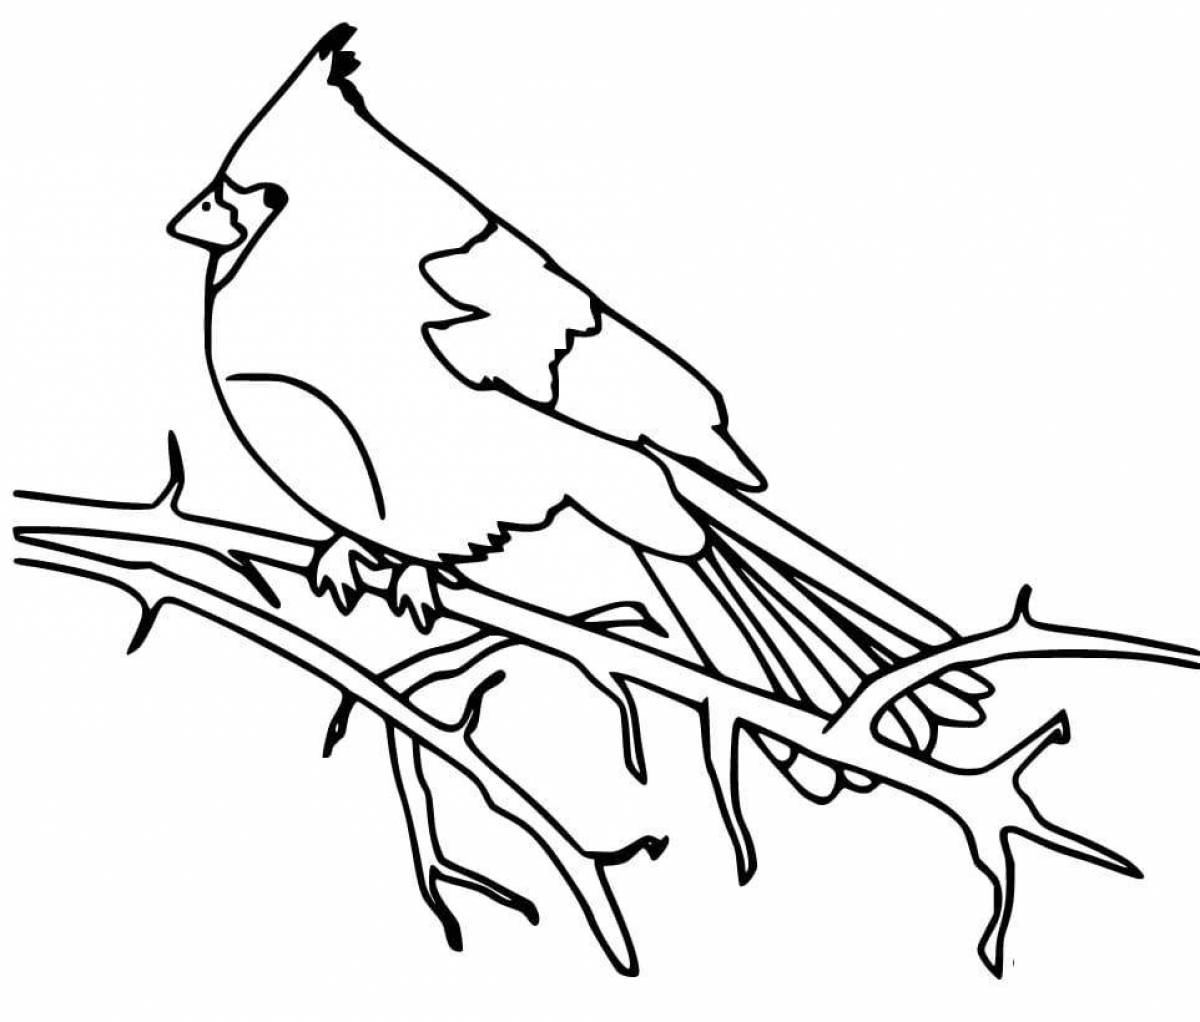 Exquisite waxwing coloring book